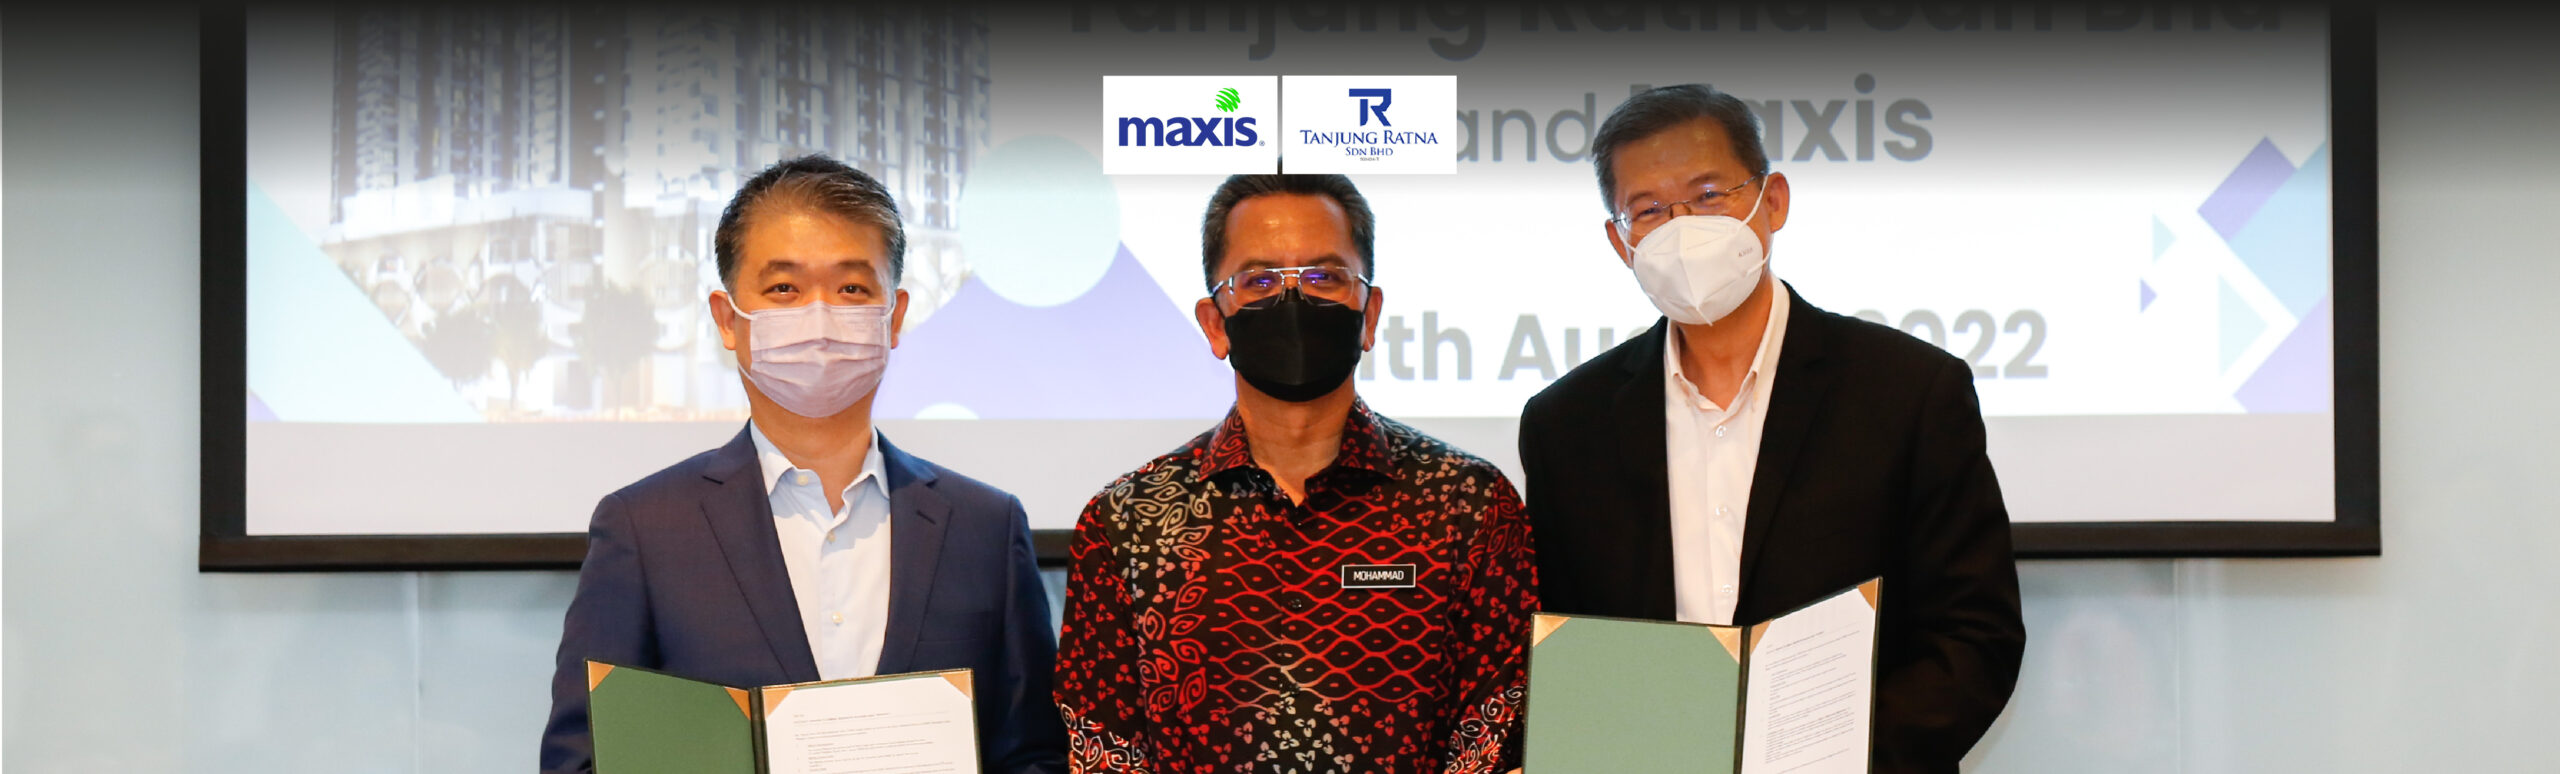 TANJUNG RATNA PARTNERS WITH MAXIS FOR THE PROVISION OF INTERNET CONNECTIVITY 